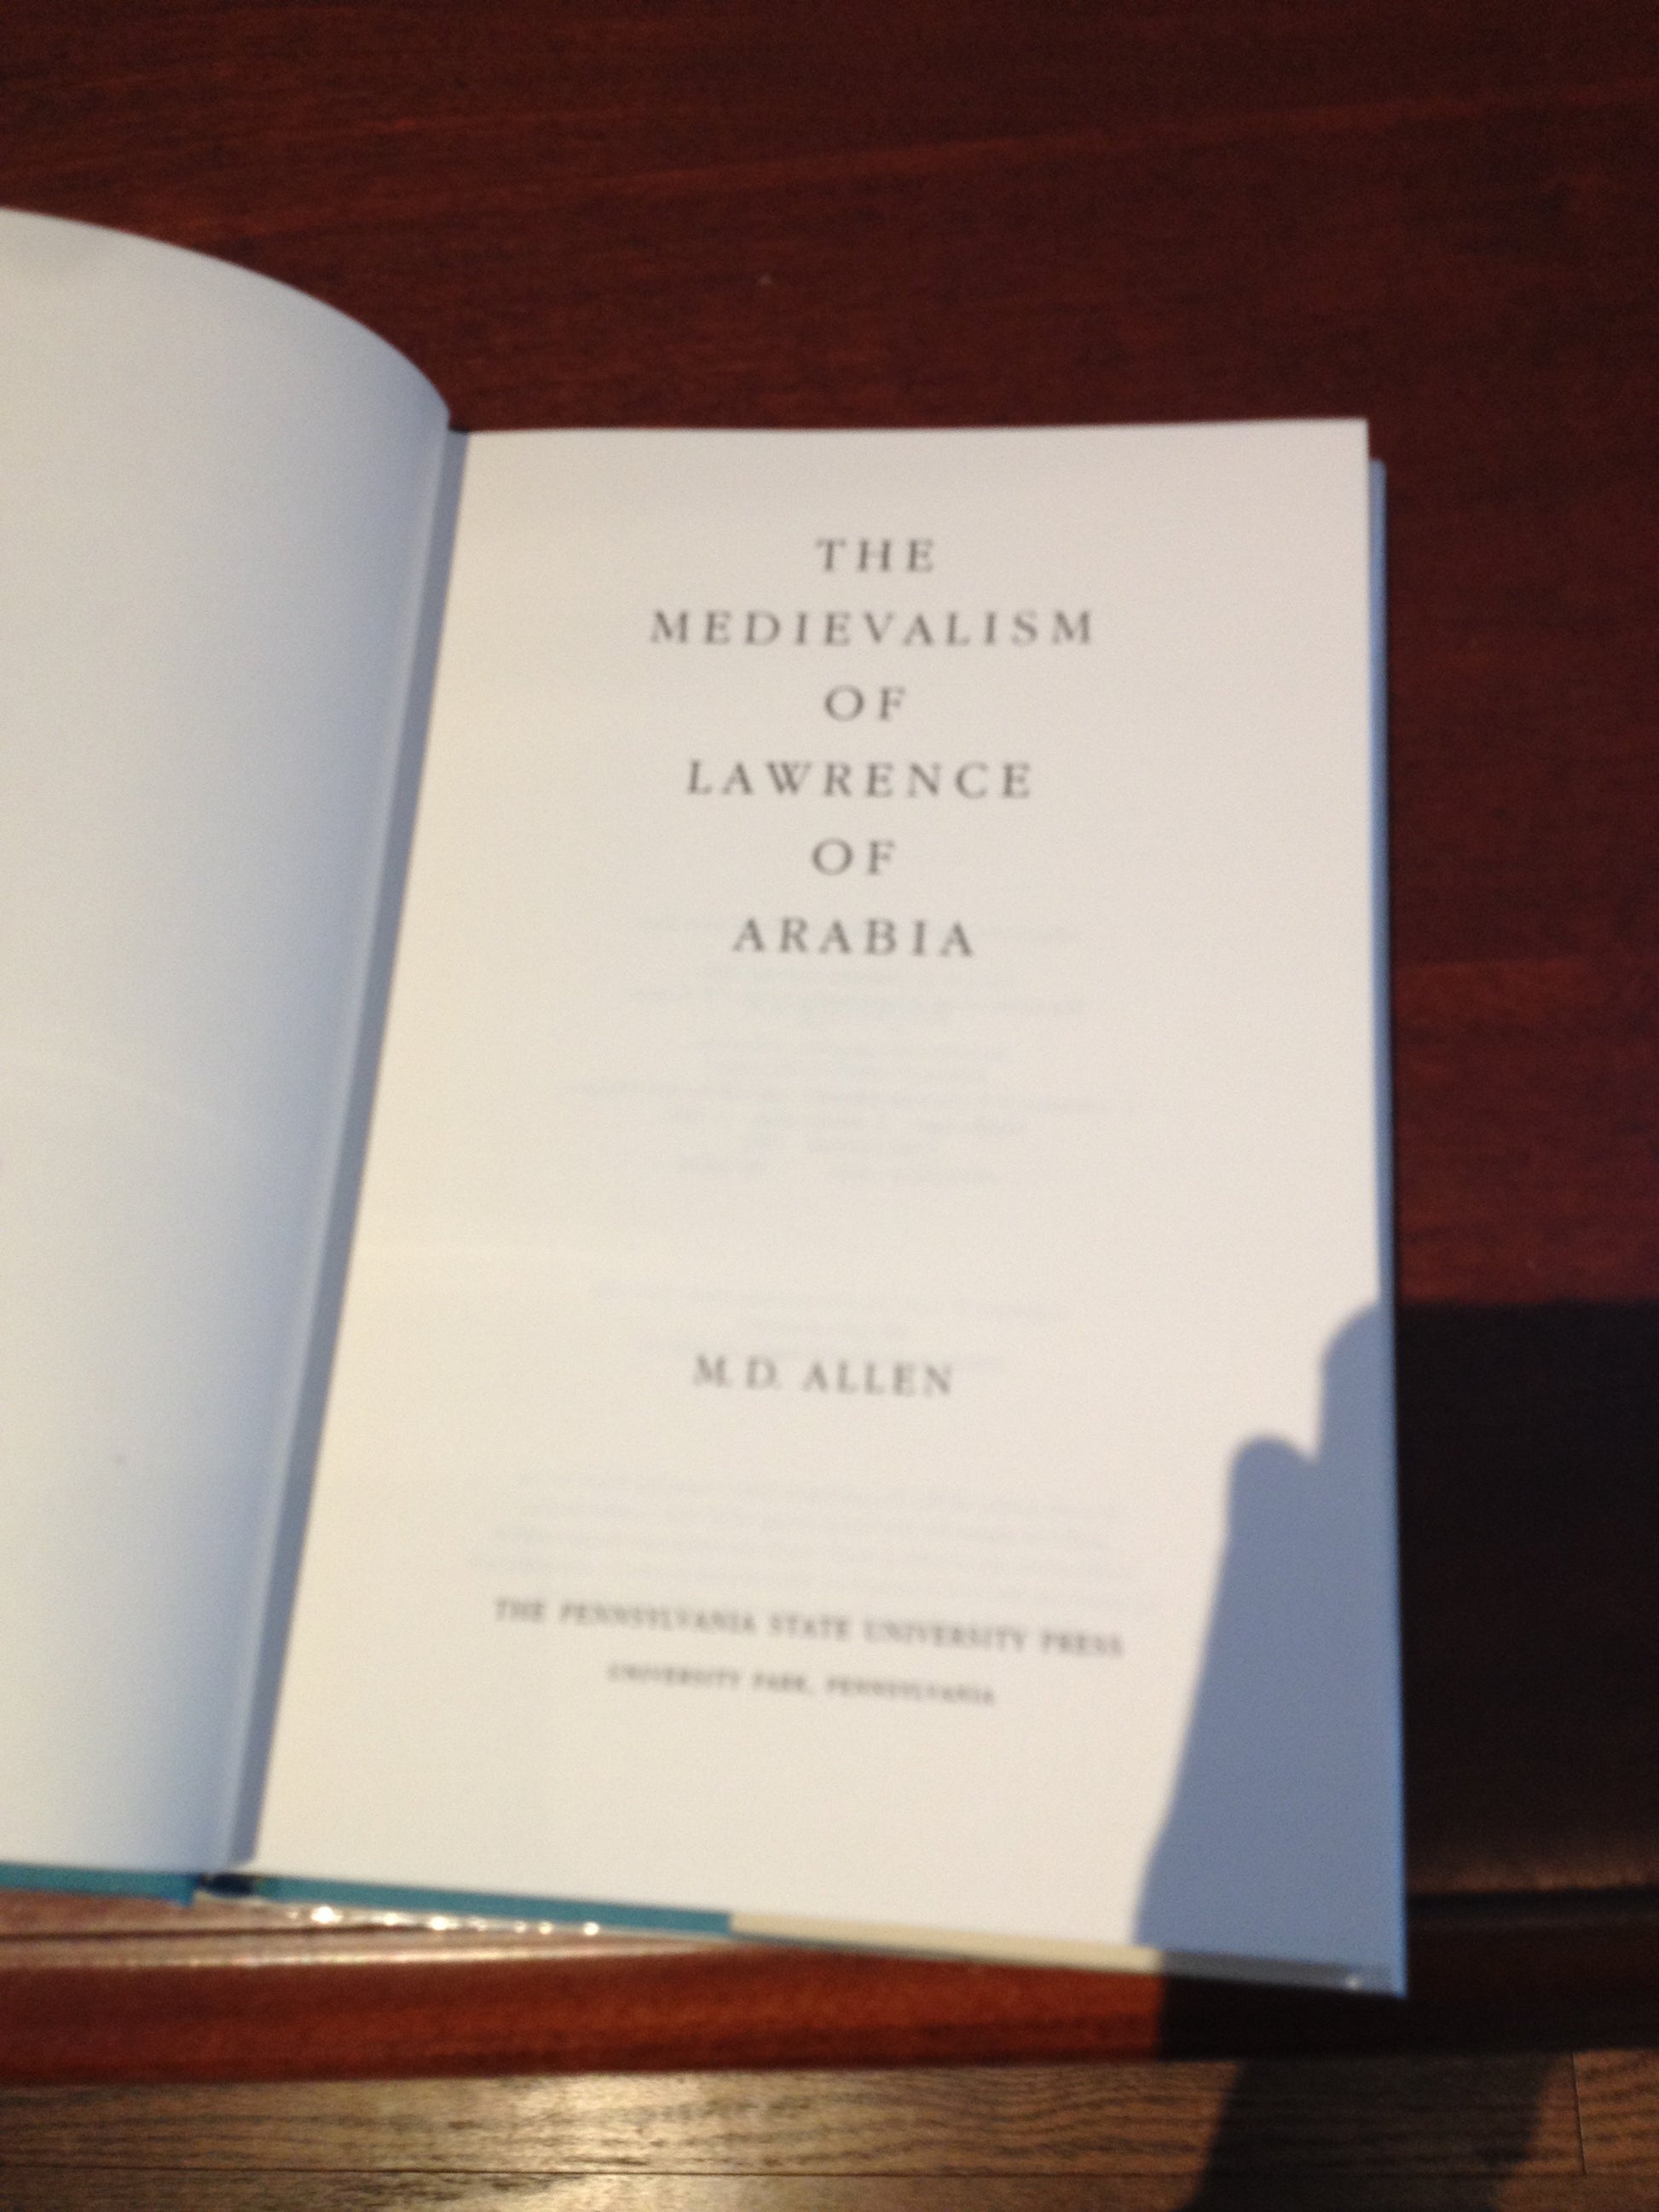 THE MEDIEVALISM OF LAWRENCE OF ARABIA  BY: M.D. ALLEN BooksCardsNBikes